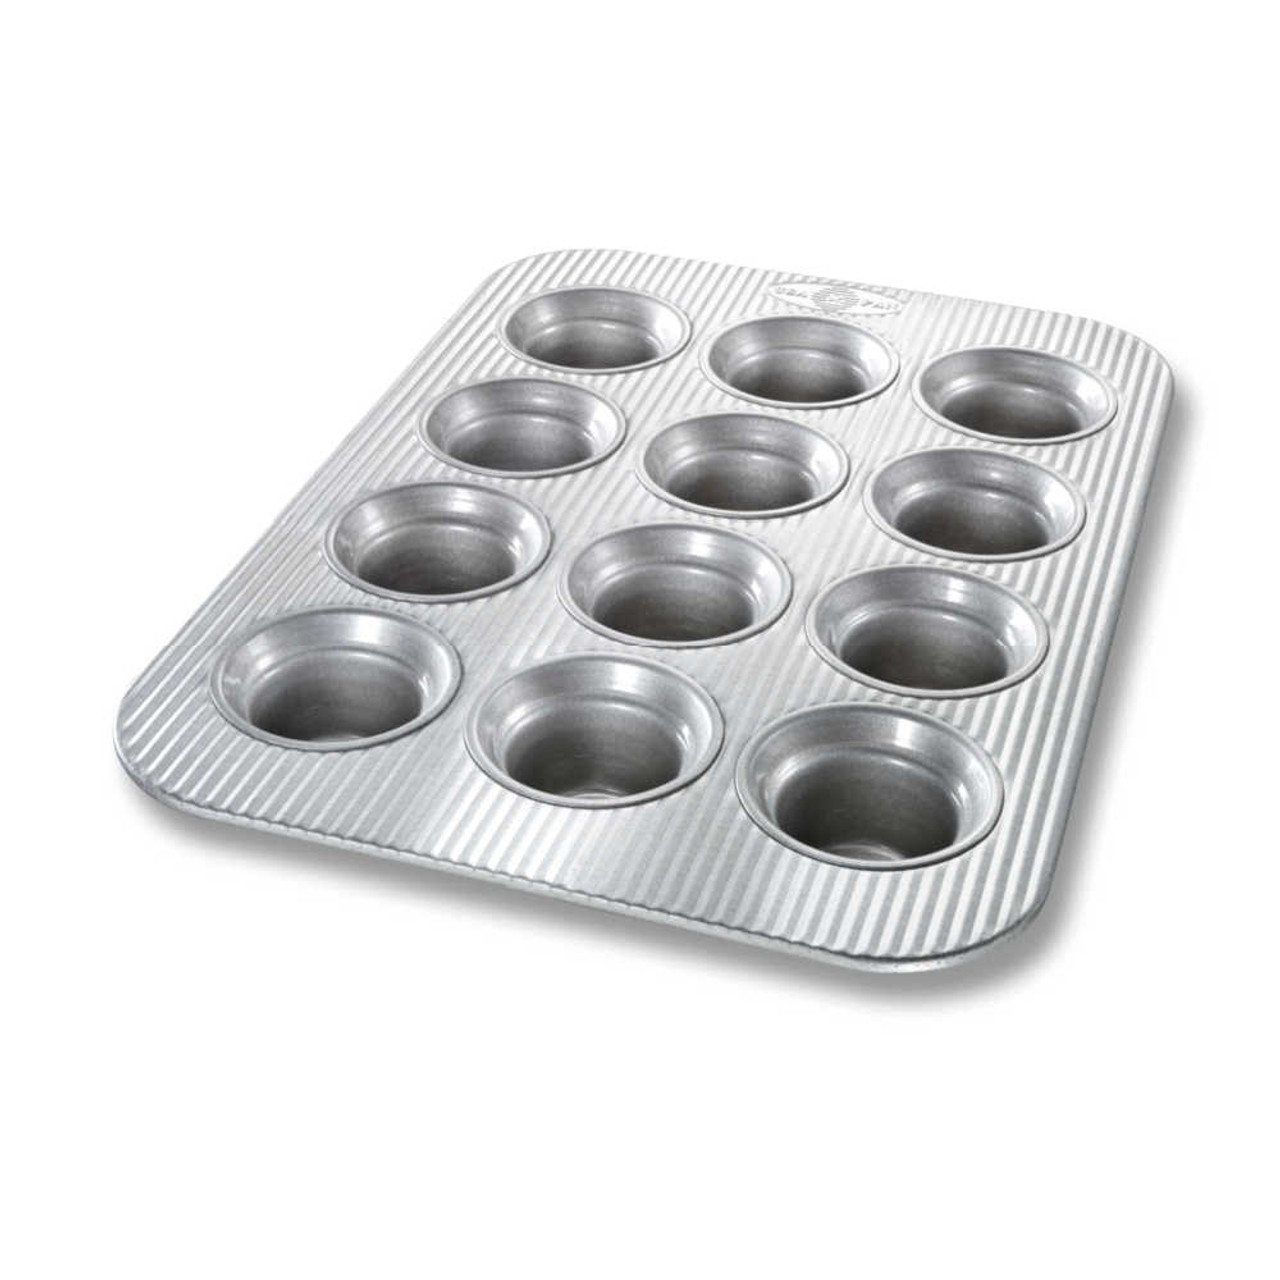 https://cdn11.bigcommerce.com/s-hccytny0od/images/stencil/1280x1280/products/4924/20797/USA_Pan_12-Cup_Crown_Muffin_Pan__13520.1658515751.jpg?c=2?imbypass=on